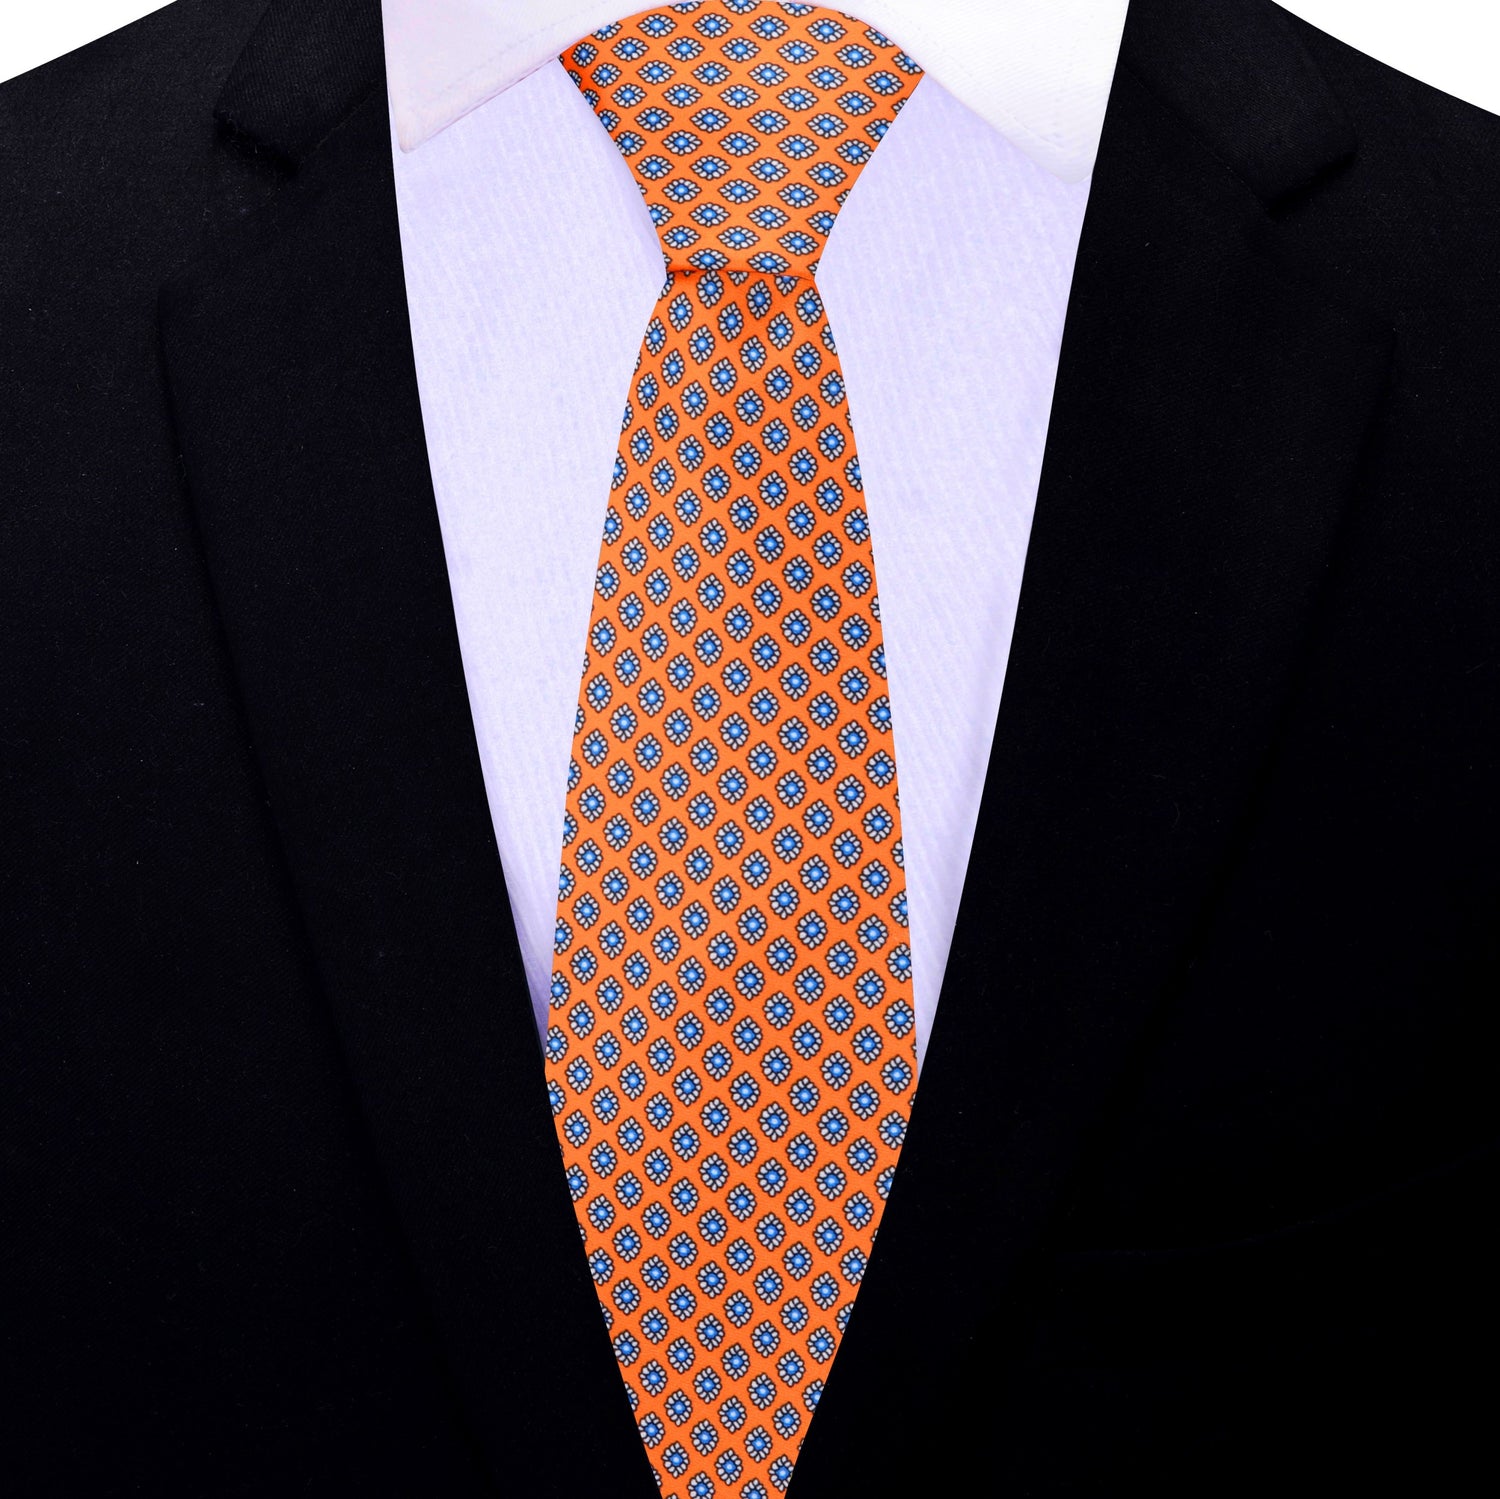 Thin Tie: A Necktie that is sunfire coral with a small medallion pattern